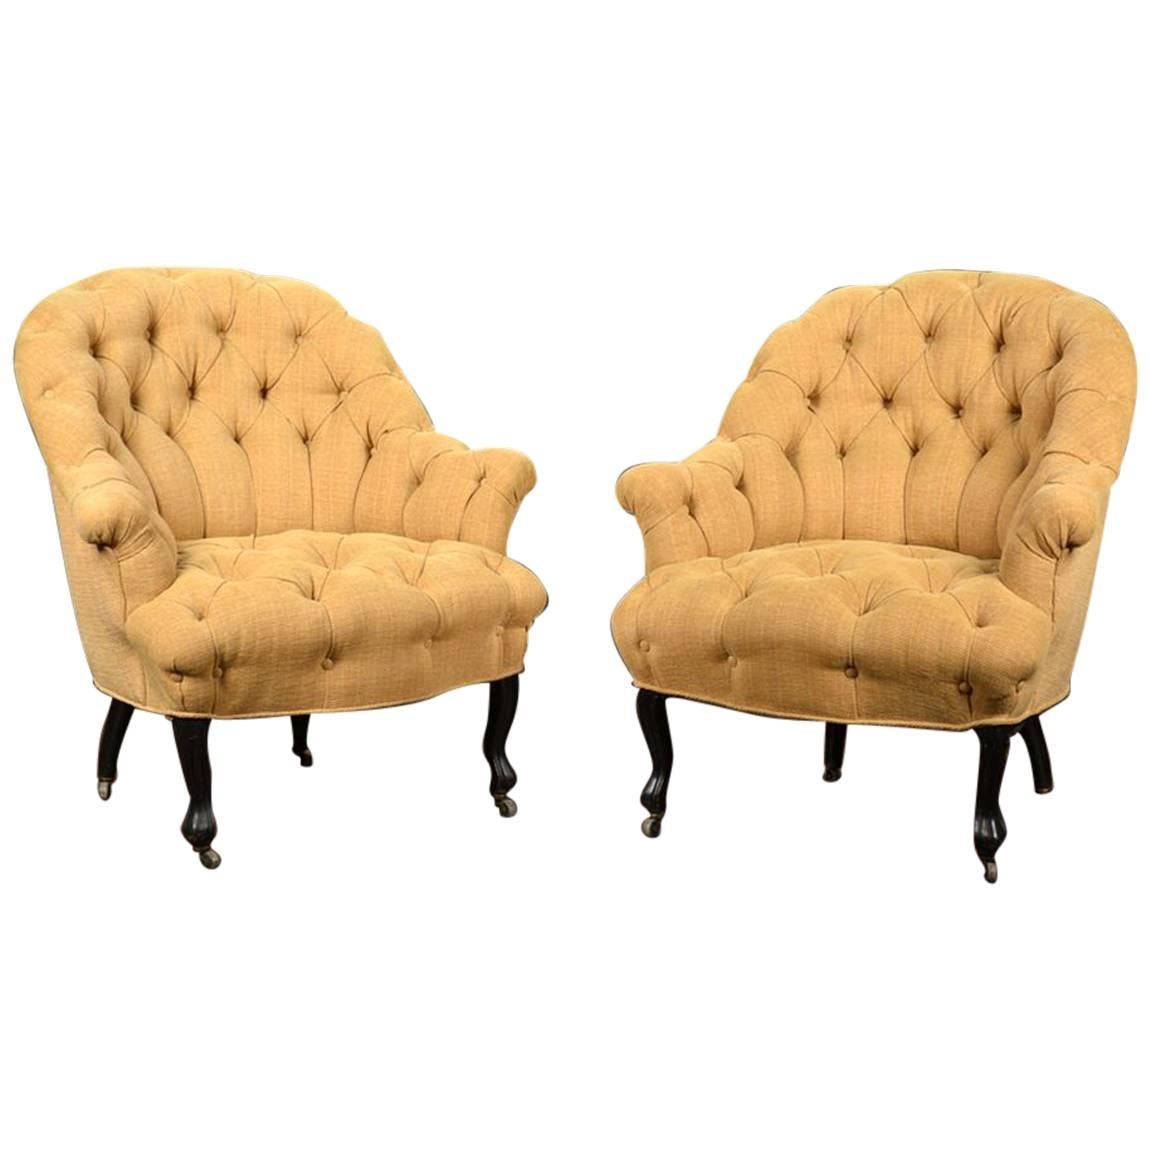 Pair of Vintage Tufted-Back Linen Chairs For Sale